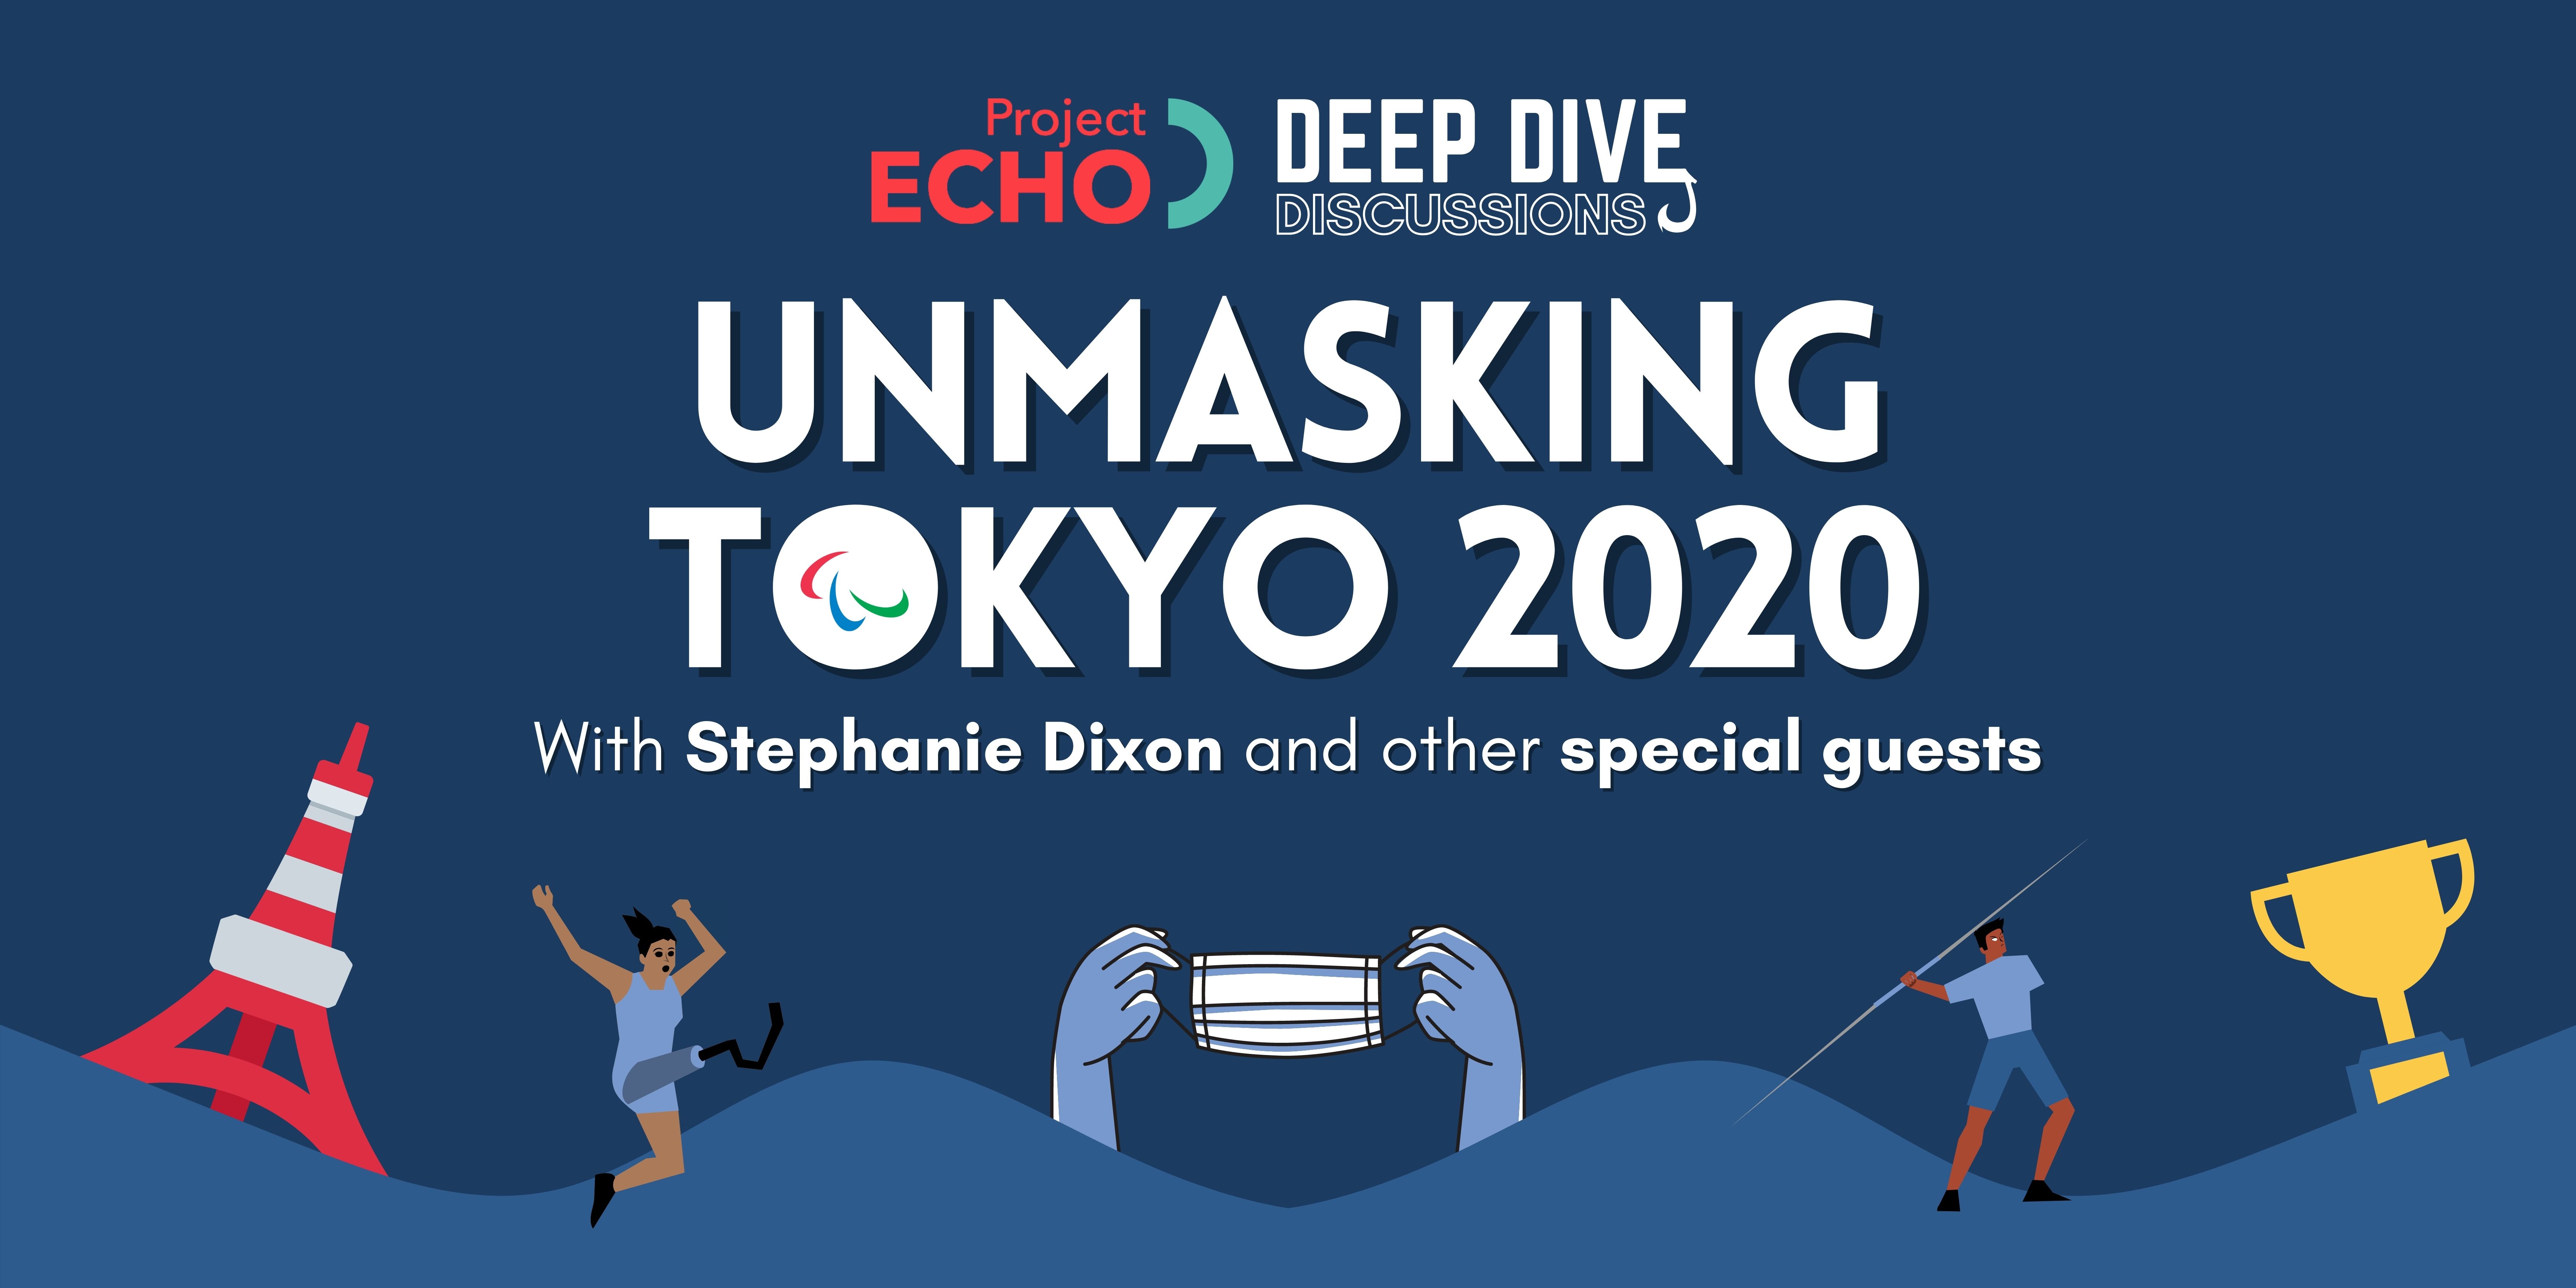 Image of text reading: "Project Echo Deep Dive Discussions: Unmasking Tokyo 2020 with Stephanie Dixon and other special guests". Image of Tokyo tower, para-athletes, and a trophy.